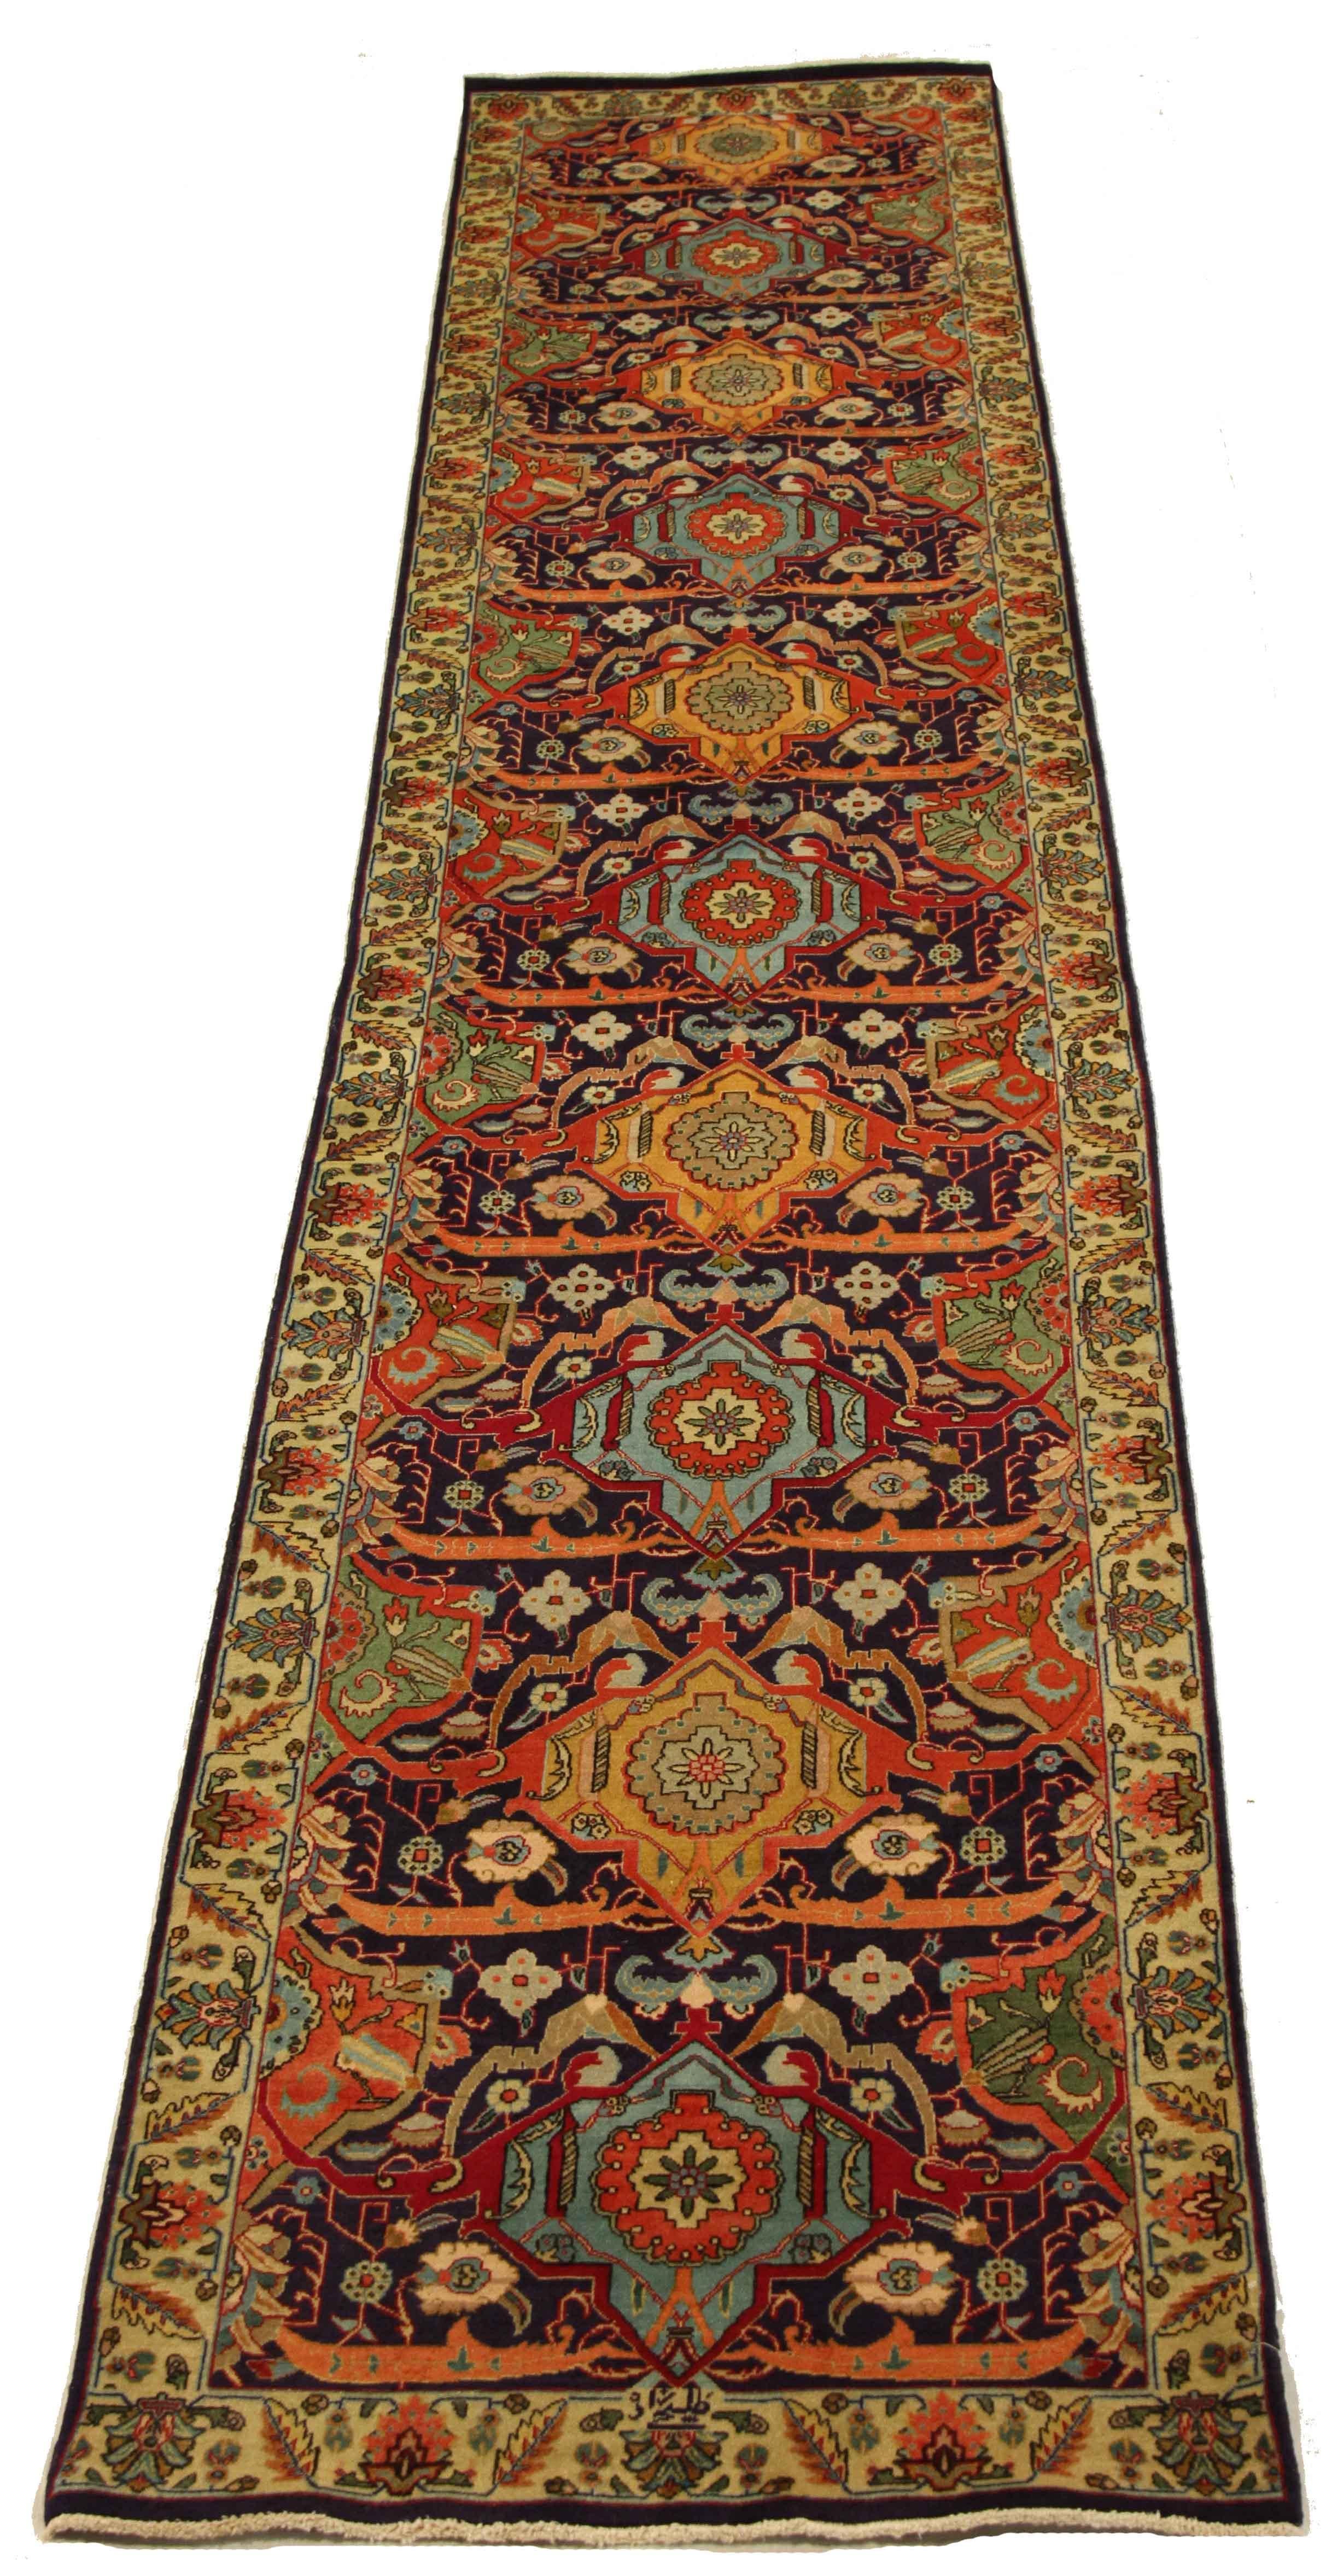 Hand-Knotted Special Twin Antique Persian Rug in Ornate Tabriz Design Circa 1950’s For Sale